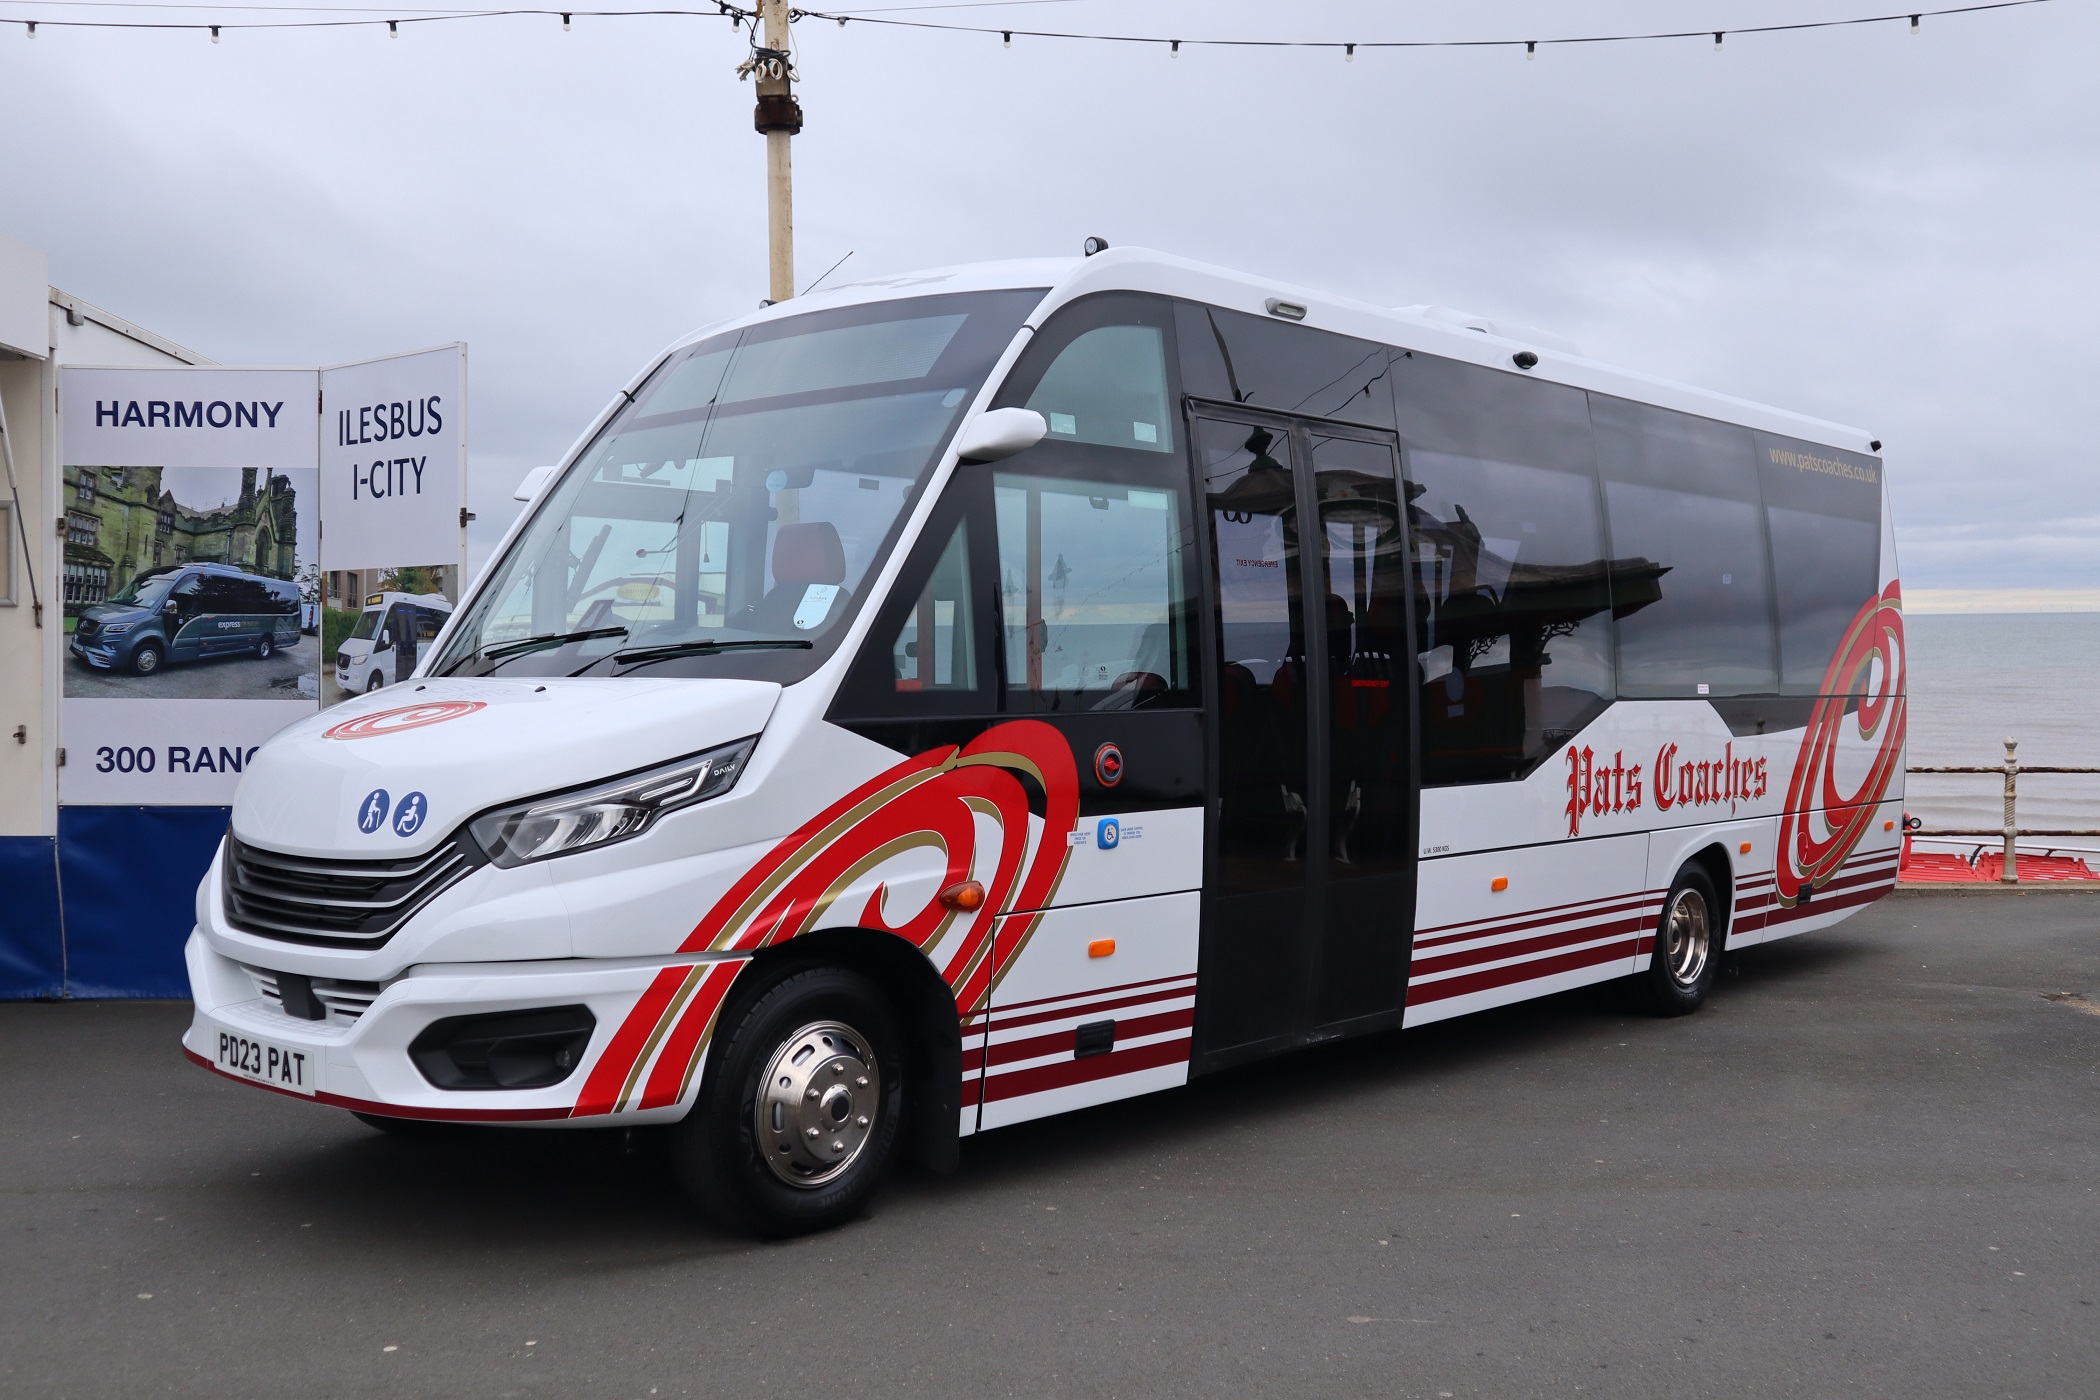 Ilesbus I City Max for Pats Coaches funded by Asset Alliance